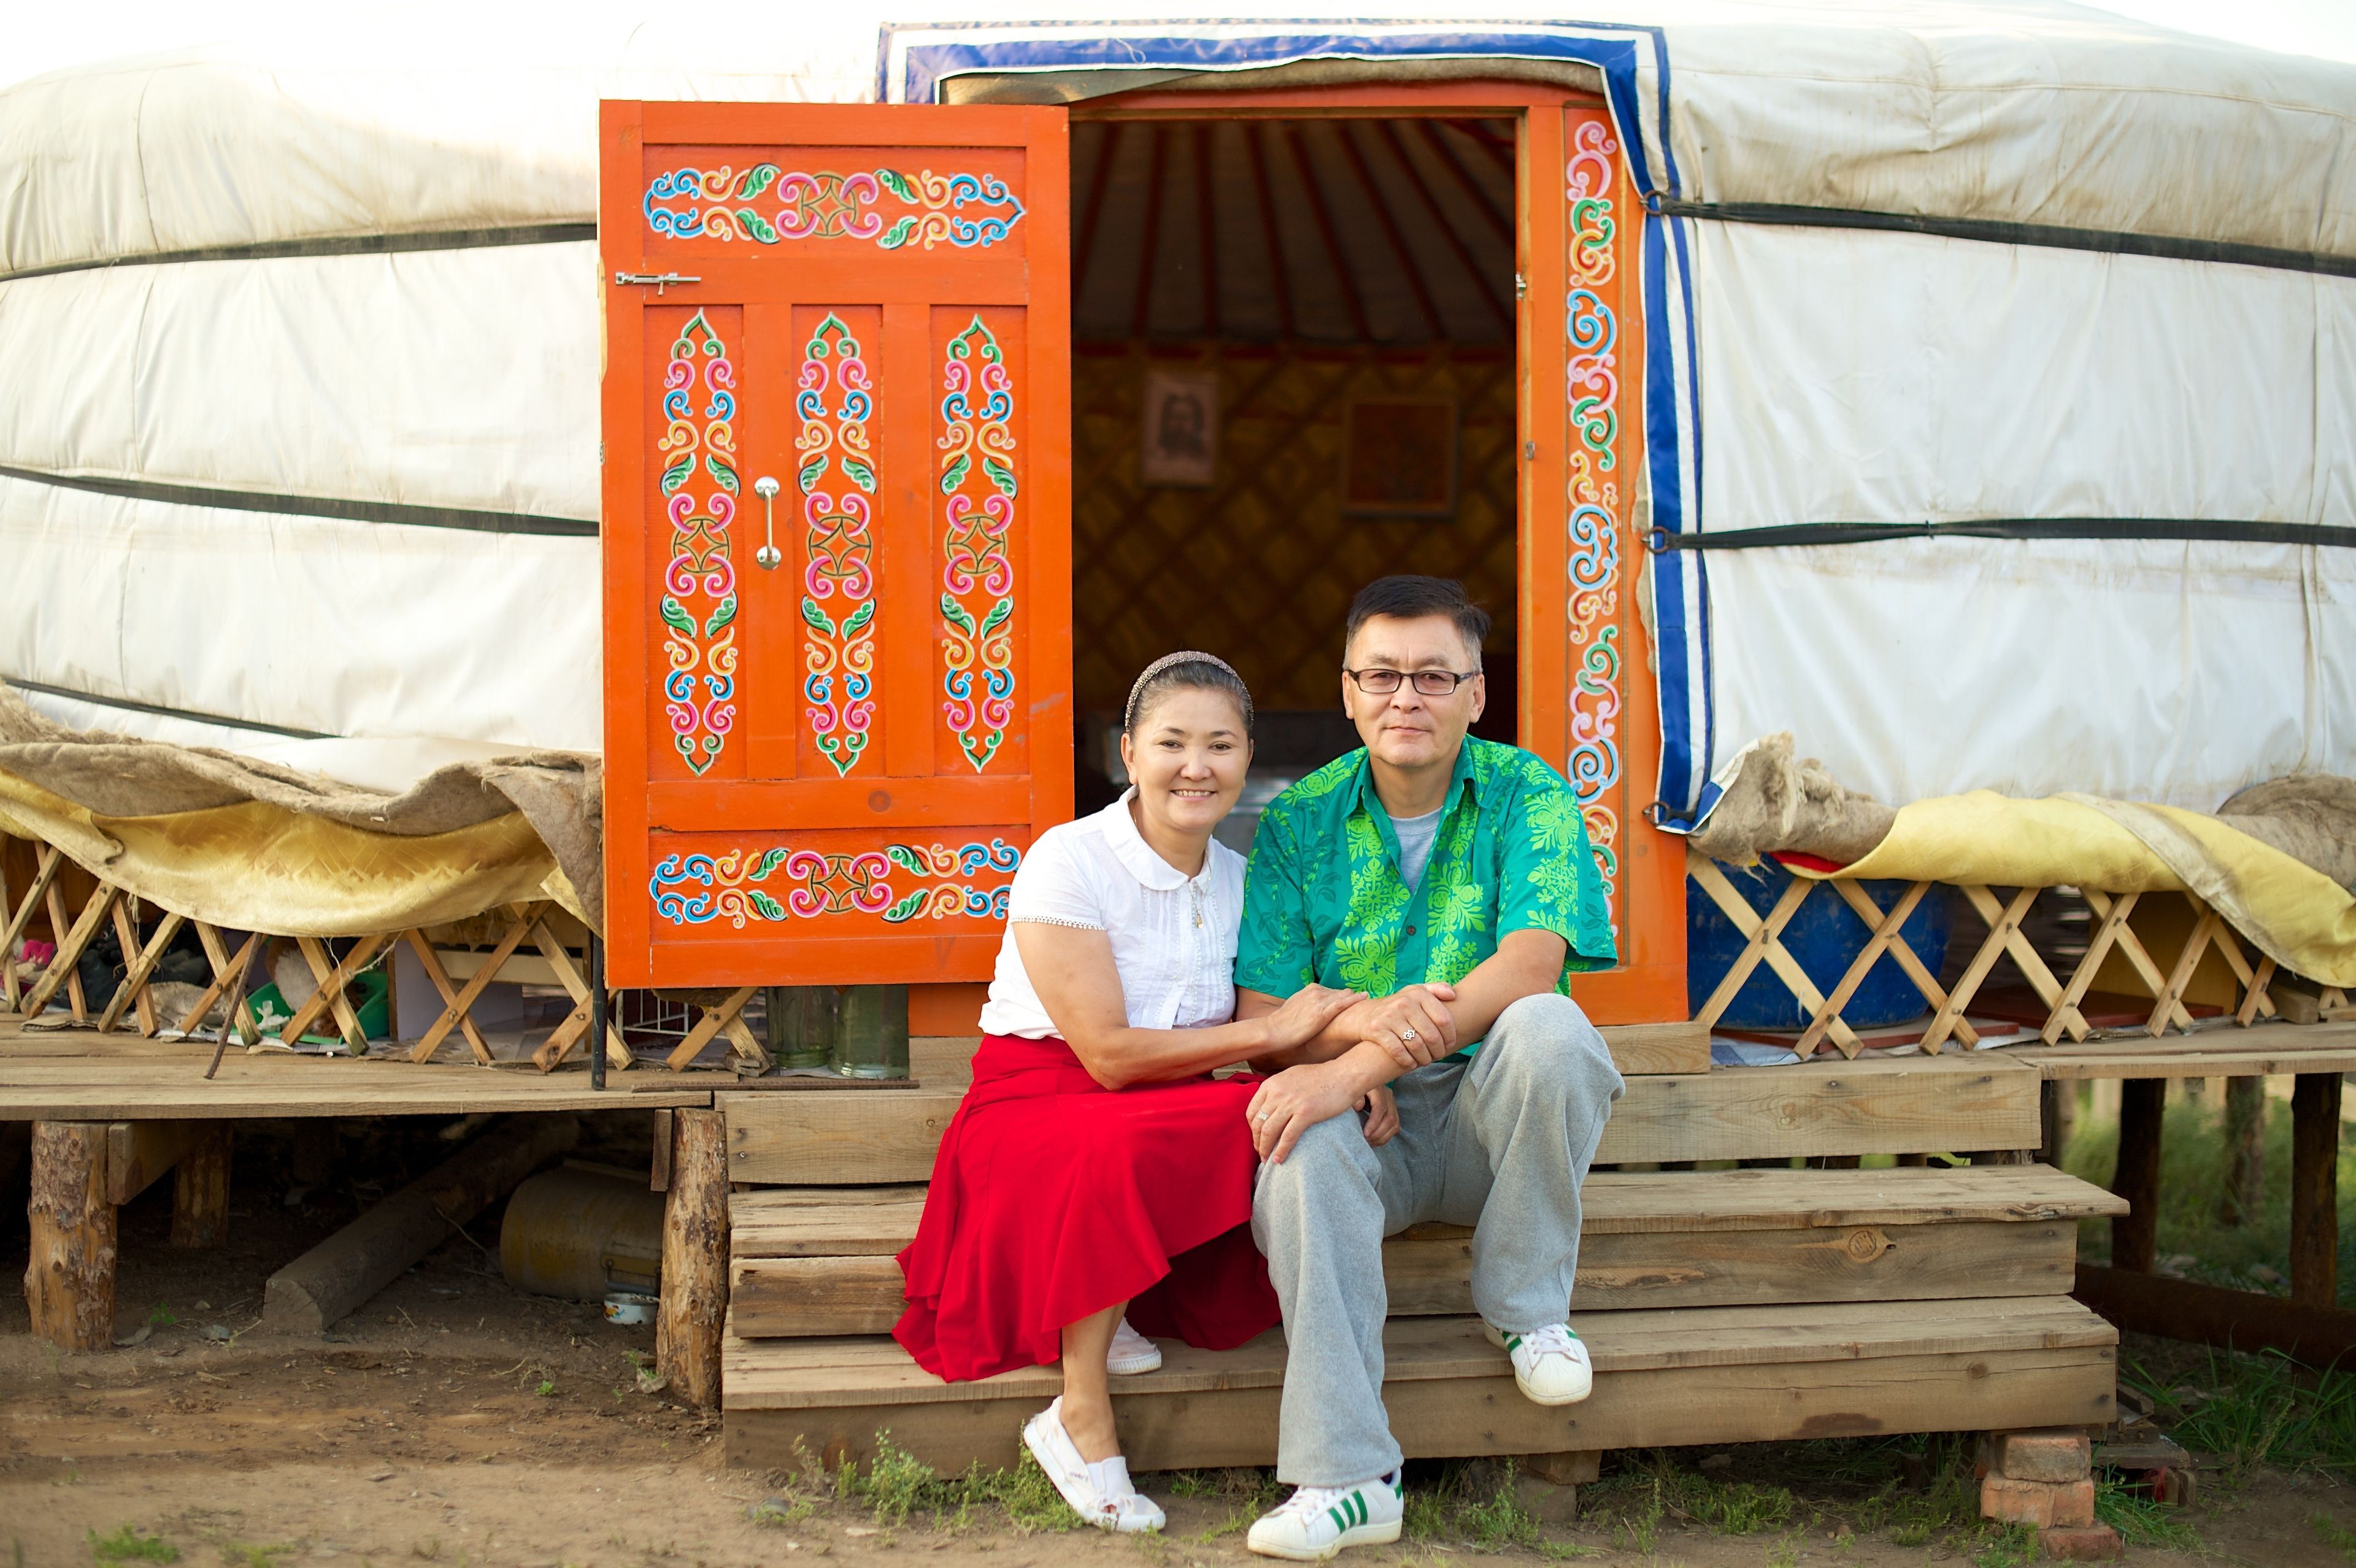 A couple from Mongolia sits on stairs by an orange door that is open.  